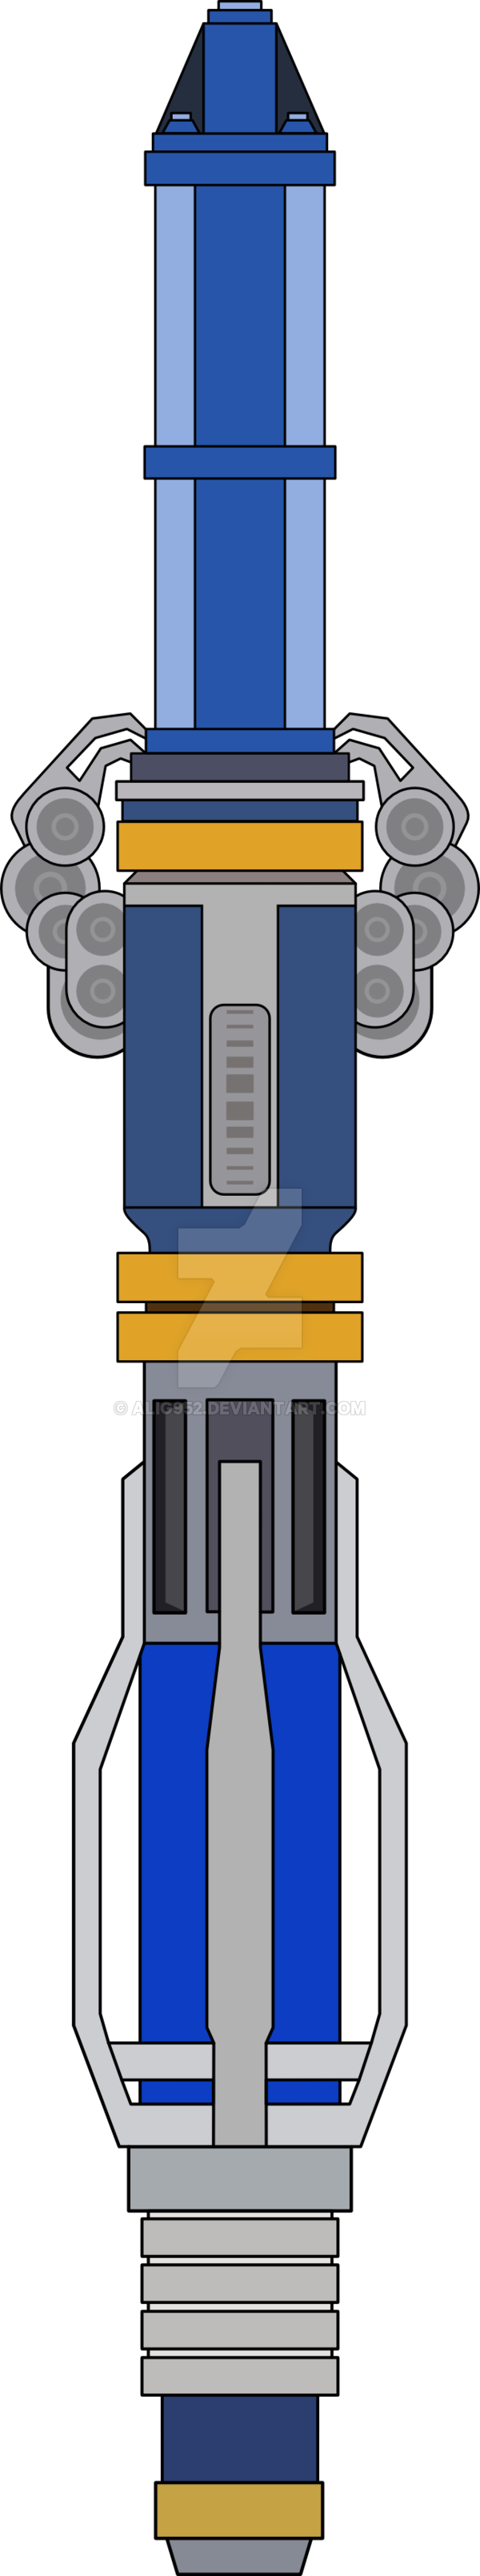 12th Doctors Sonic Screwdriver Rough Version - 12th Doctors Sonic Screwdriver (600x3218)